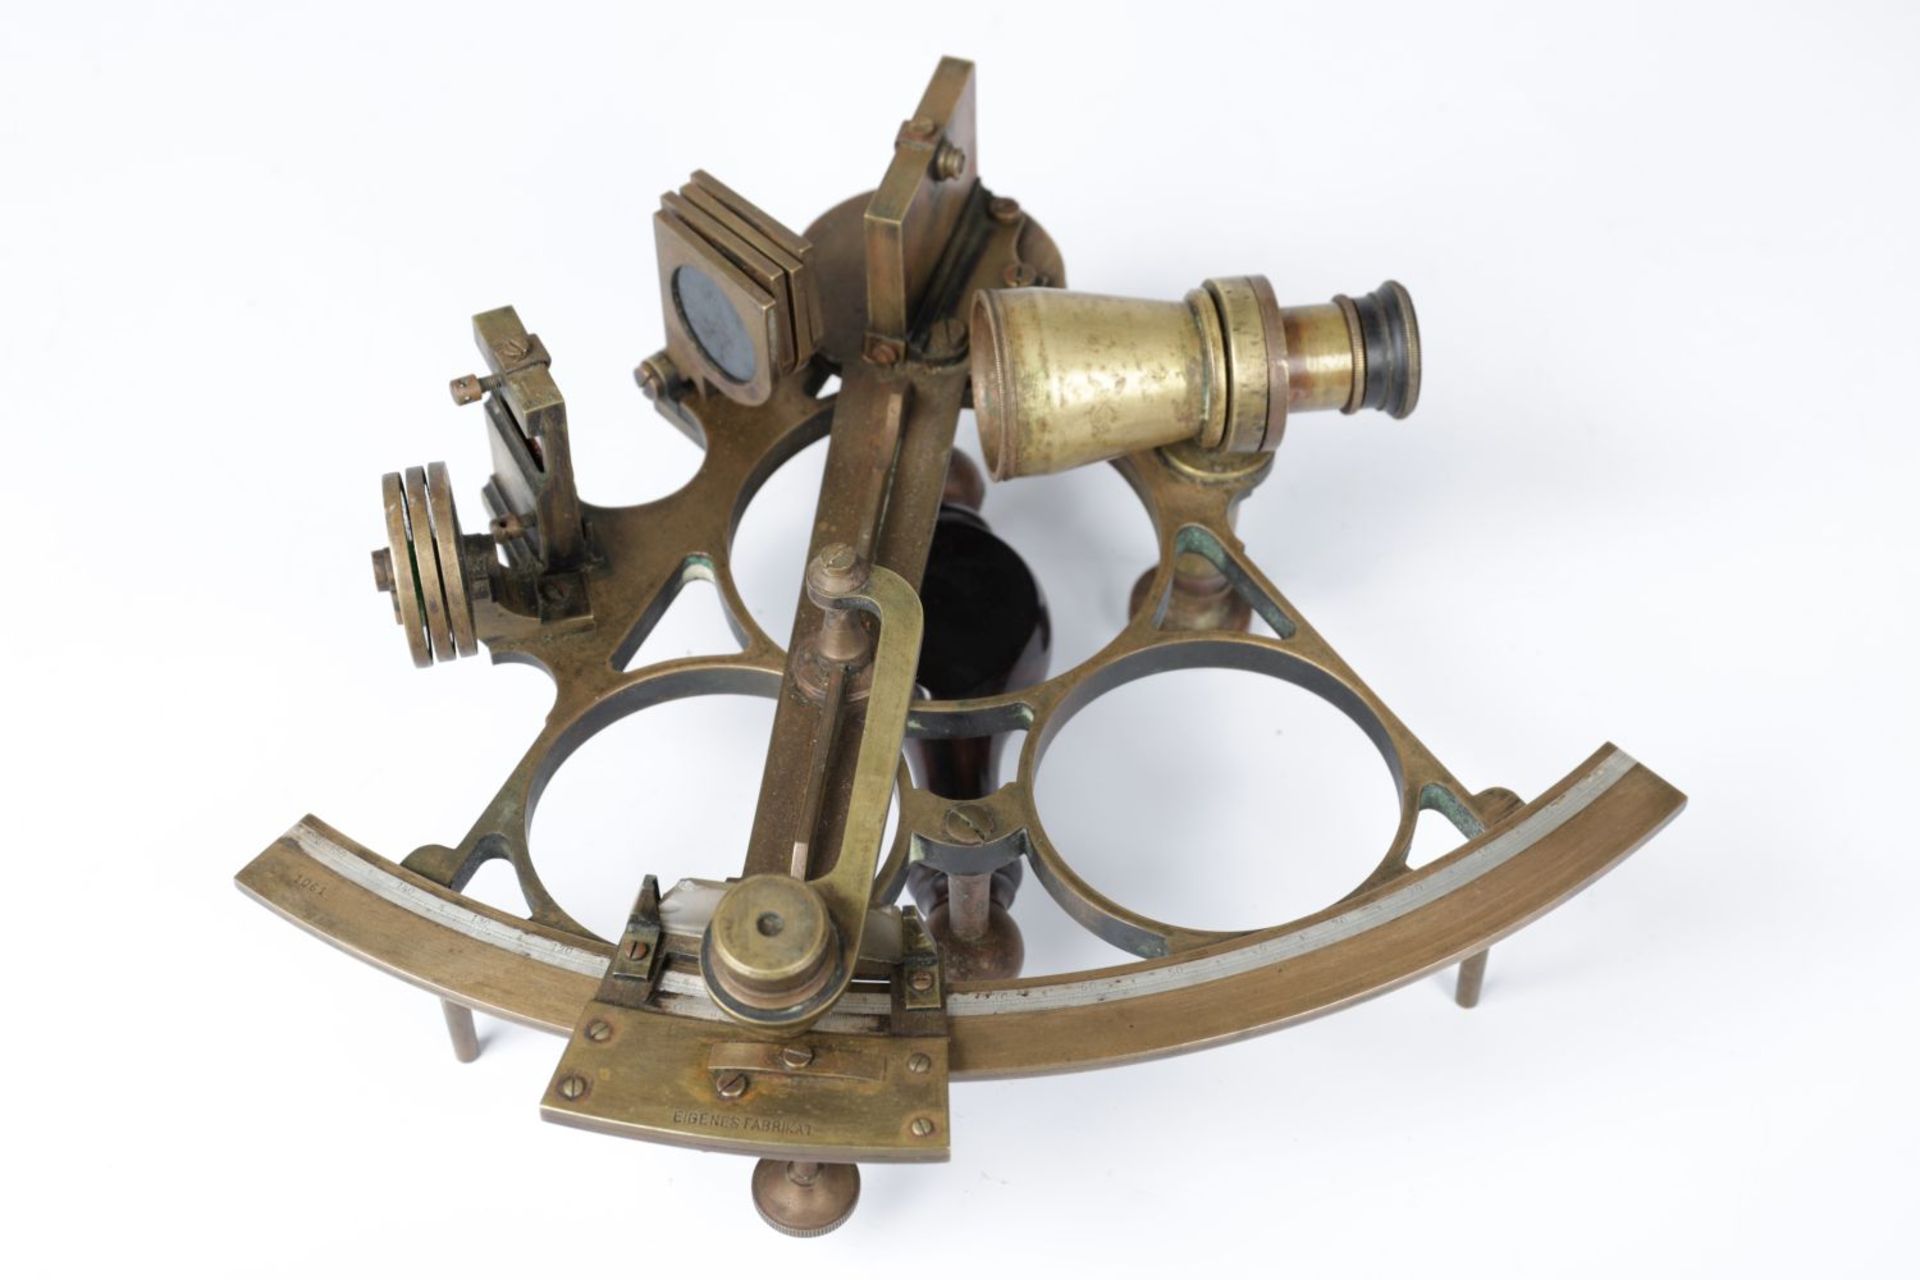 19TH-CENTURY BRASS SEXTANT - Image 2 of 4